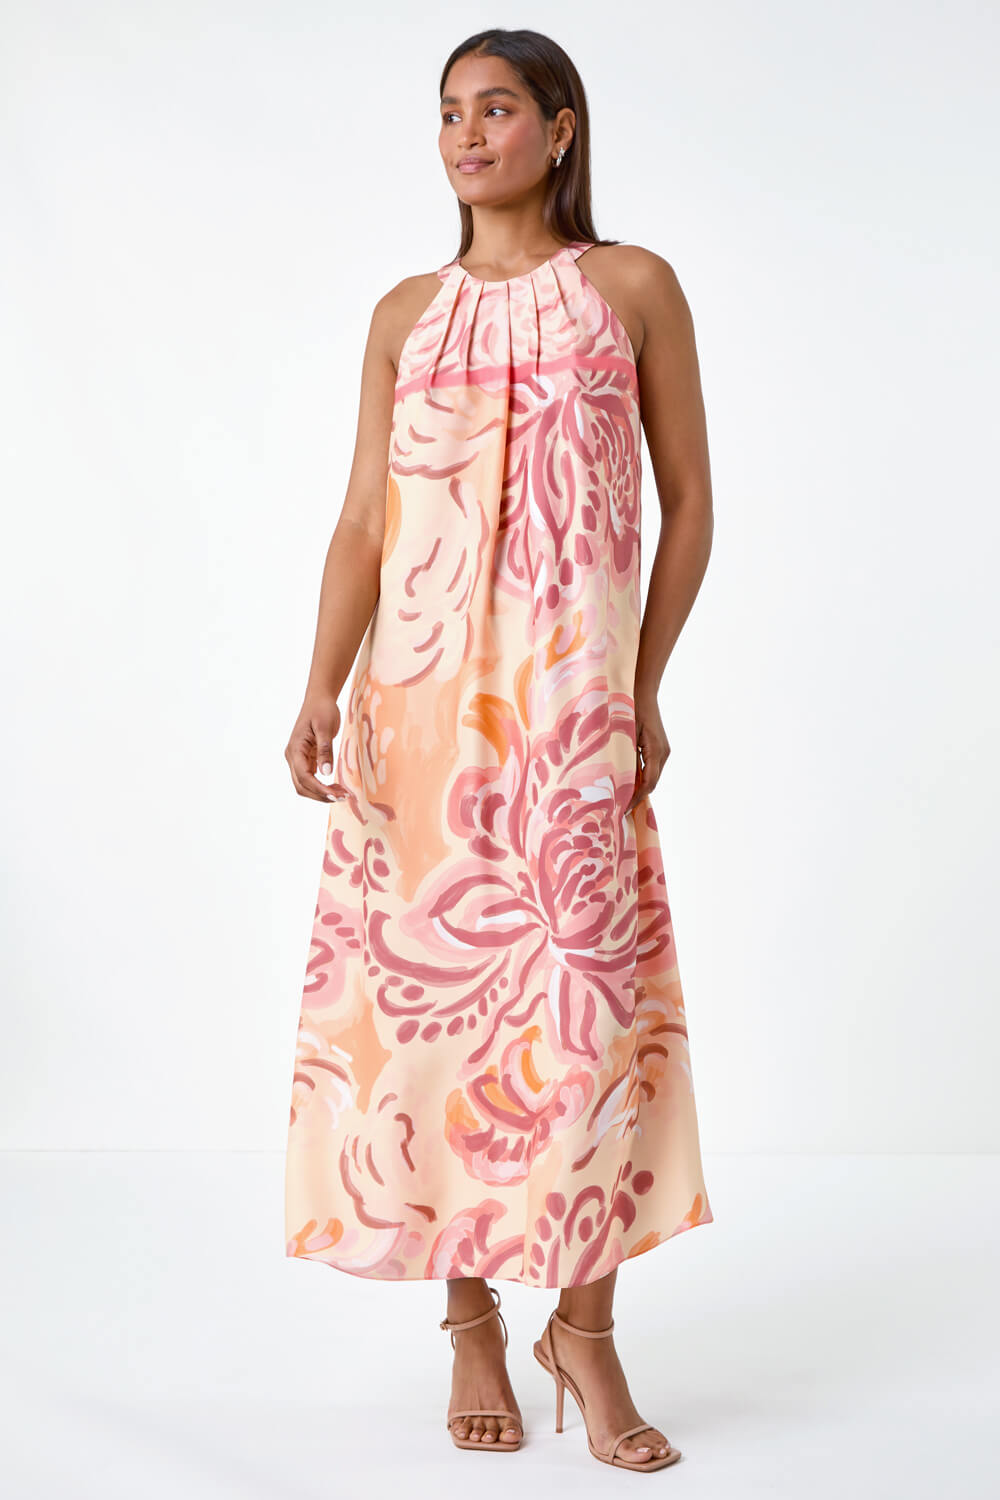 Peach Abstract Print Pocket Trapeze Dress, Image 2 of 5